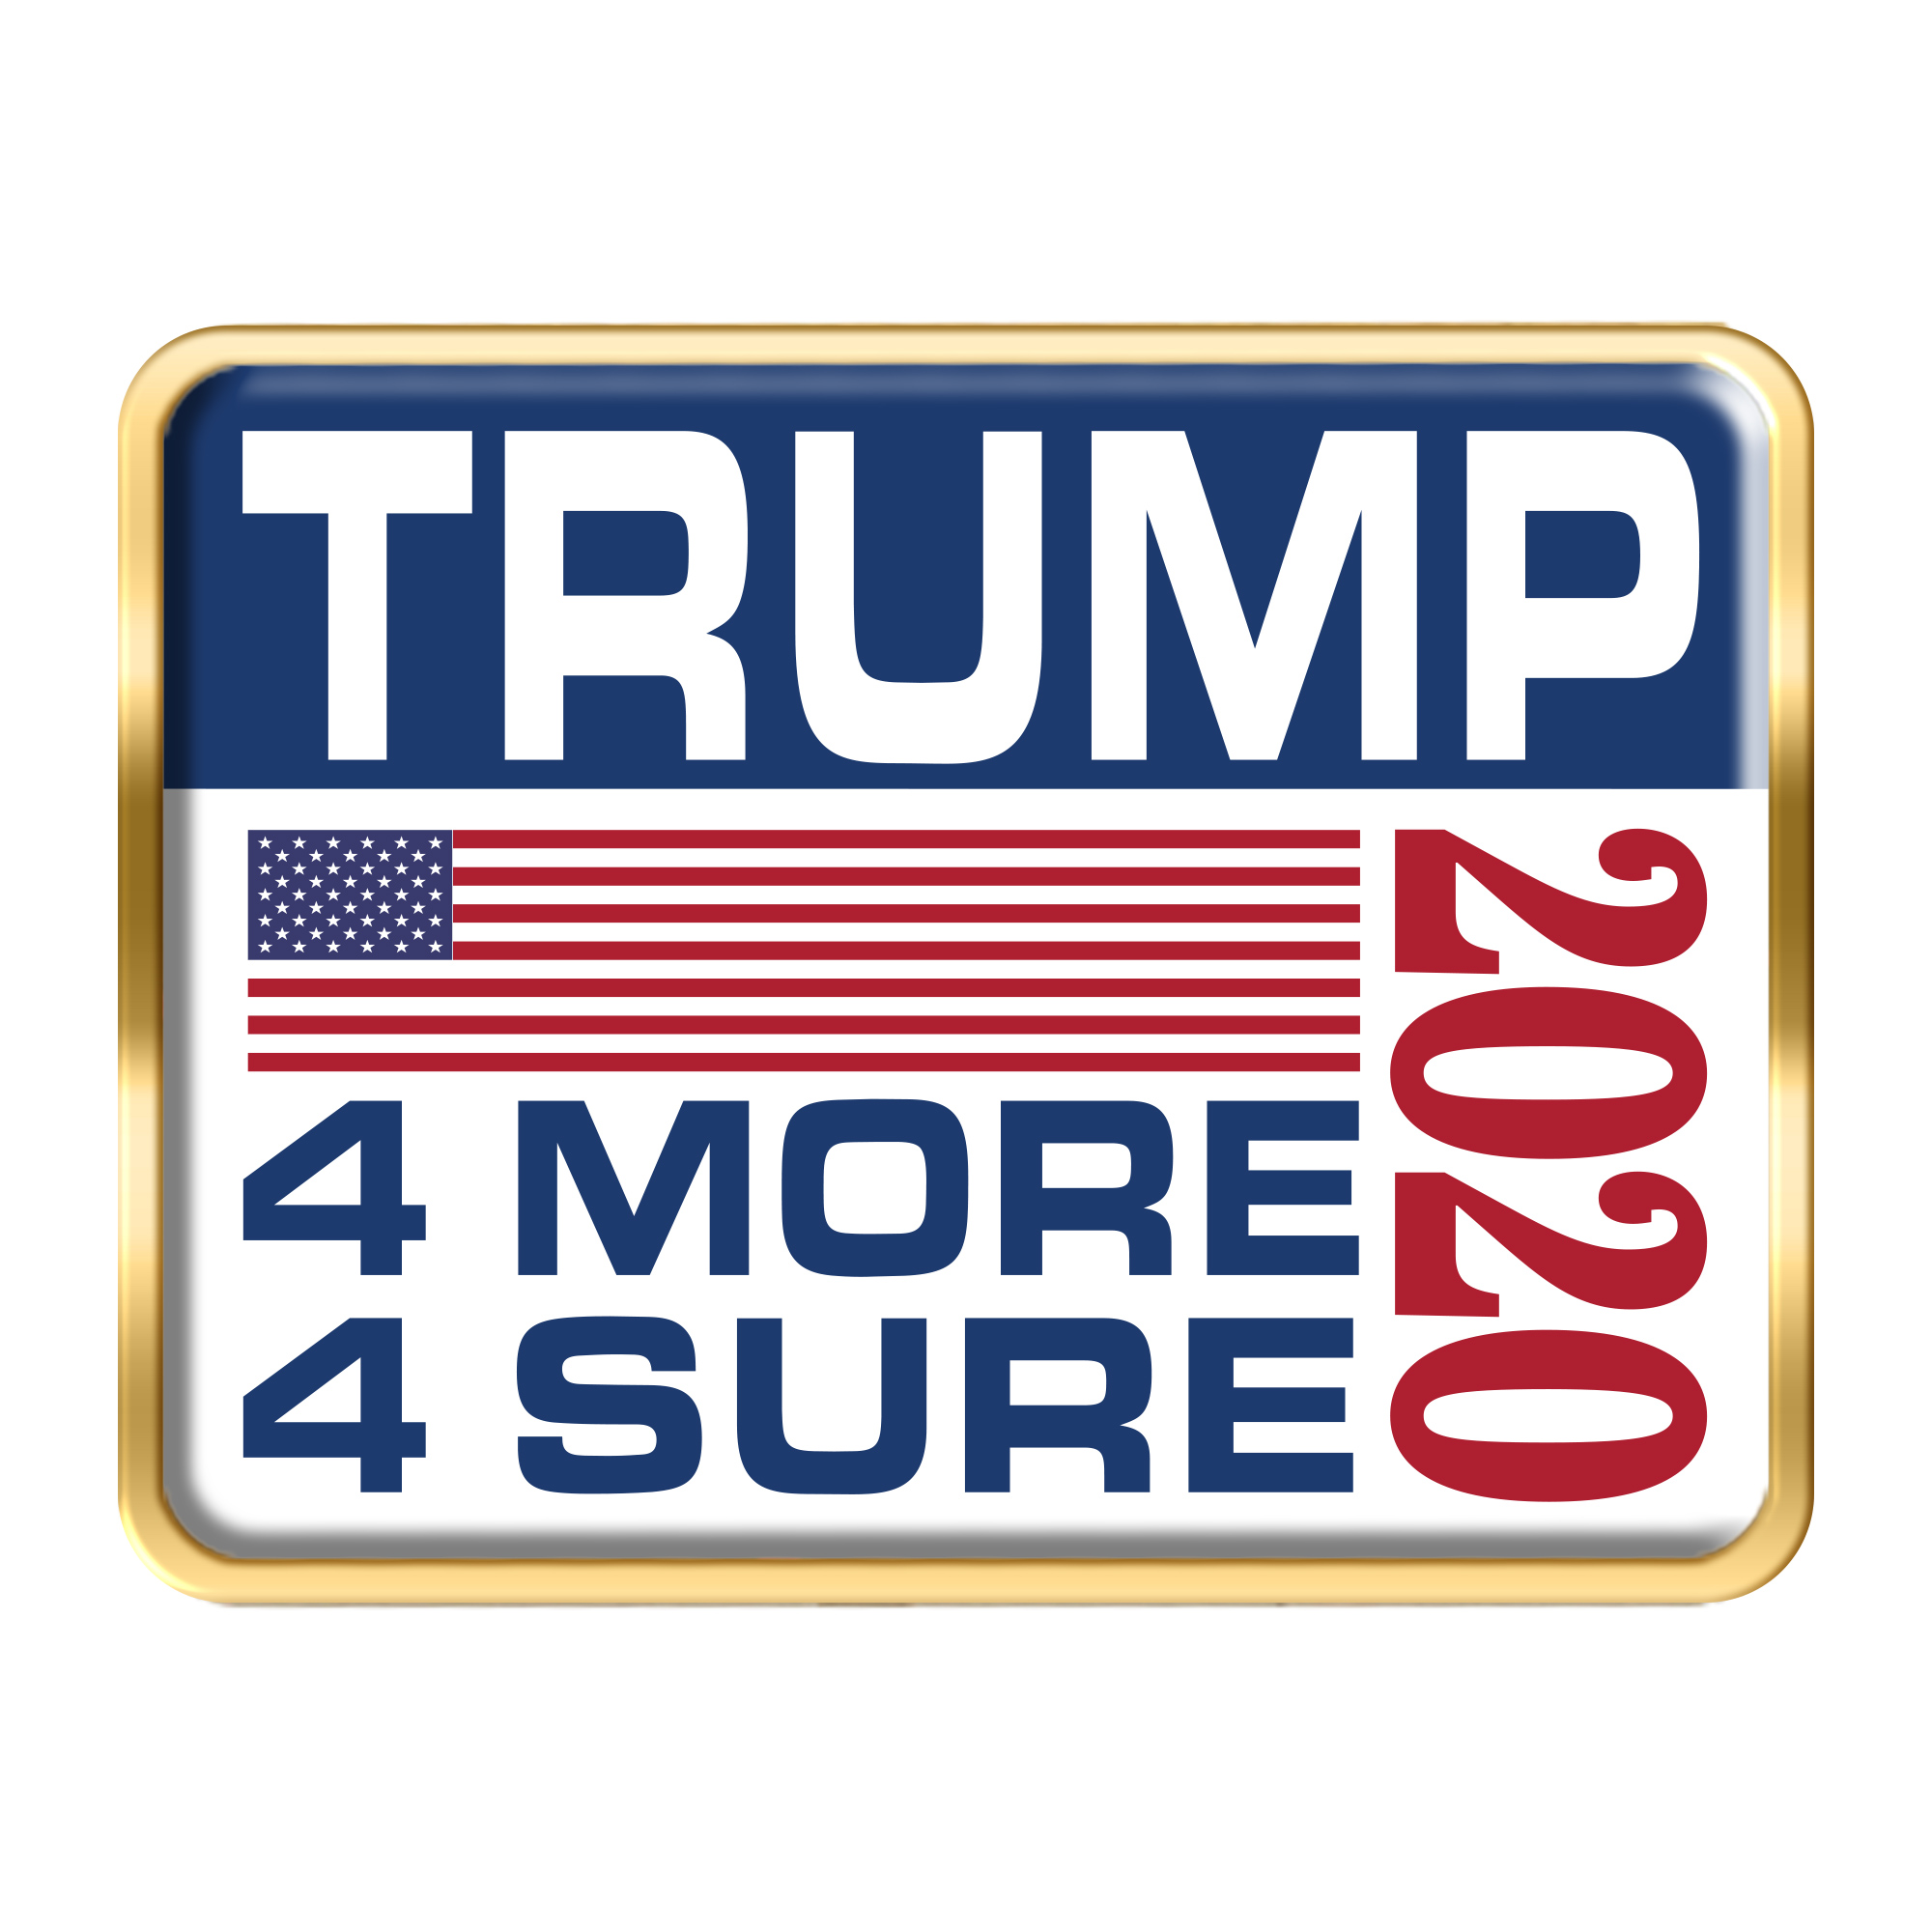 Trump 4 More 4 Sure Rounded Corner Rectangle Pin - 1.25 x 1 inch